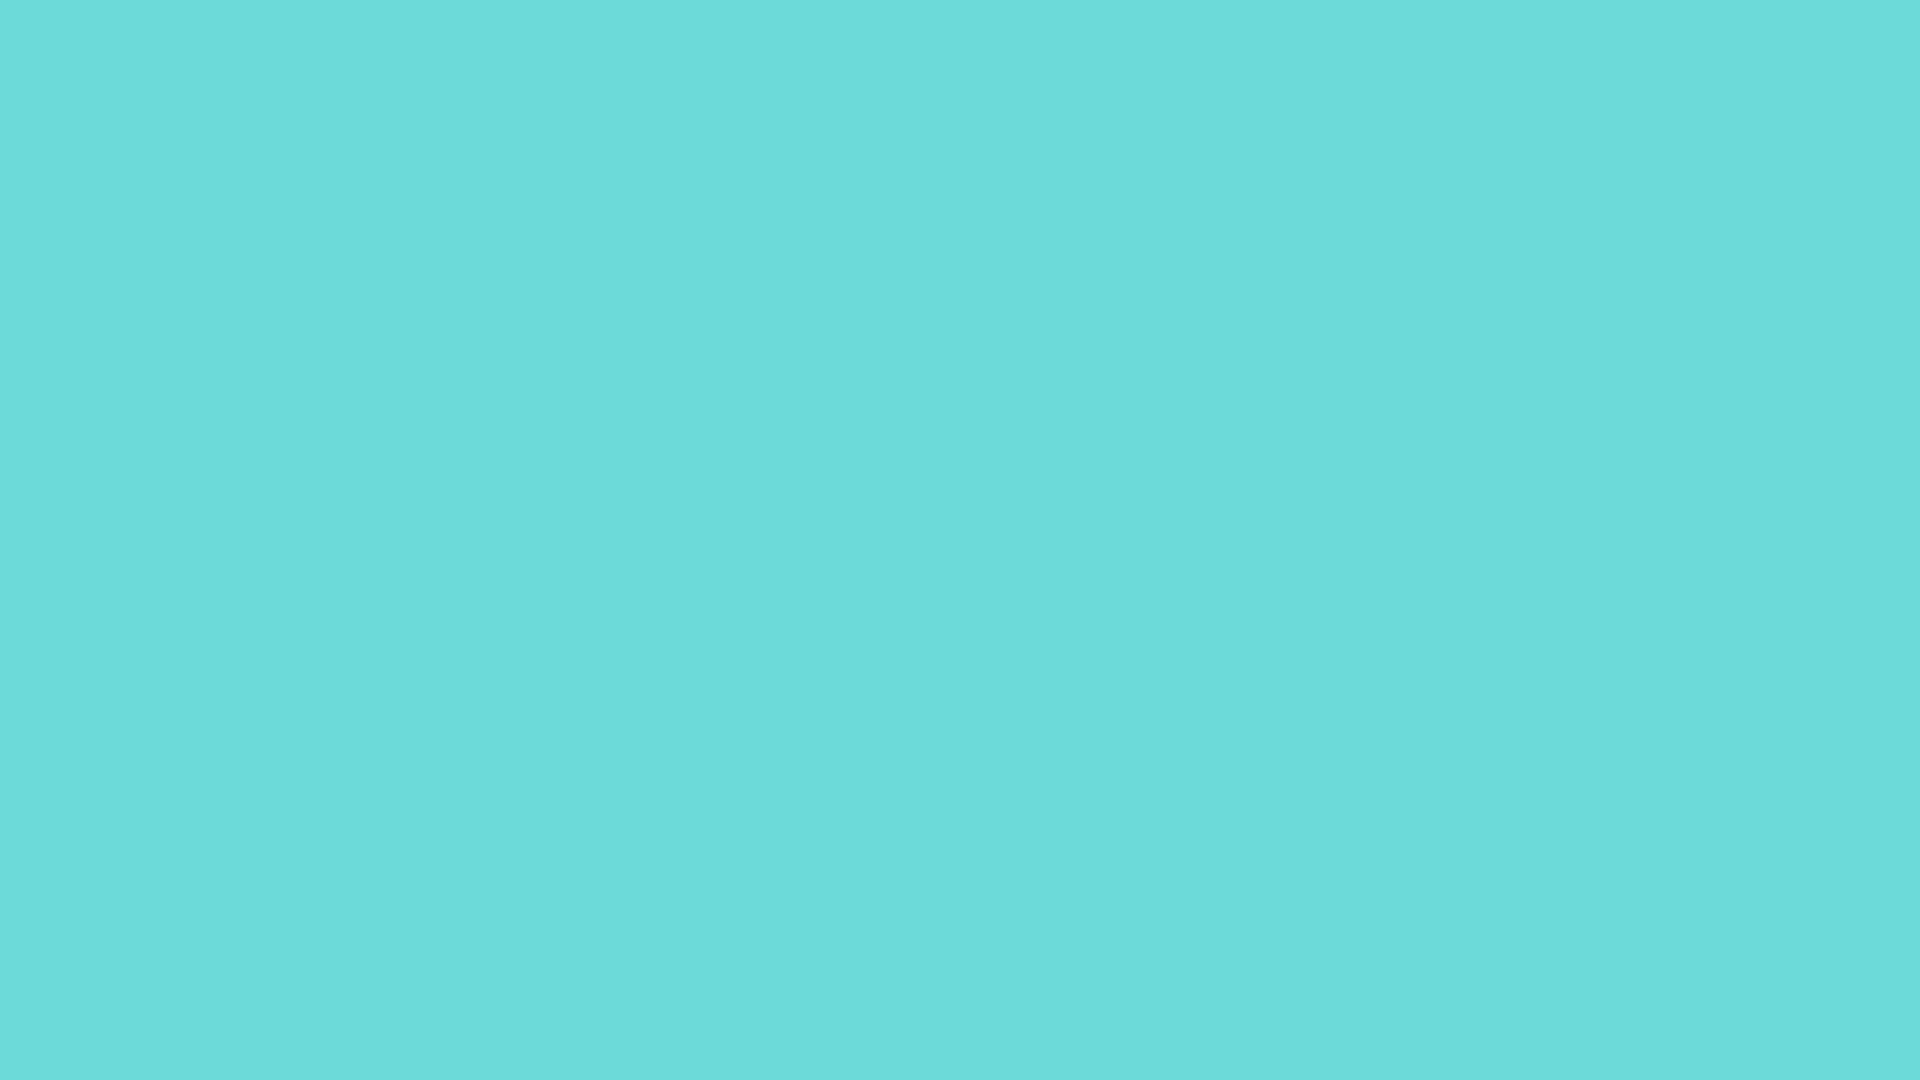 A Turquoise Background With A White Arrow